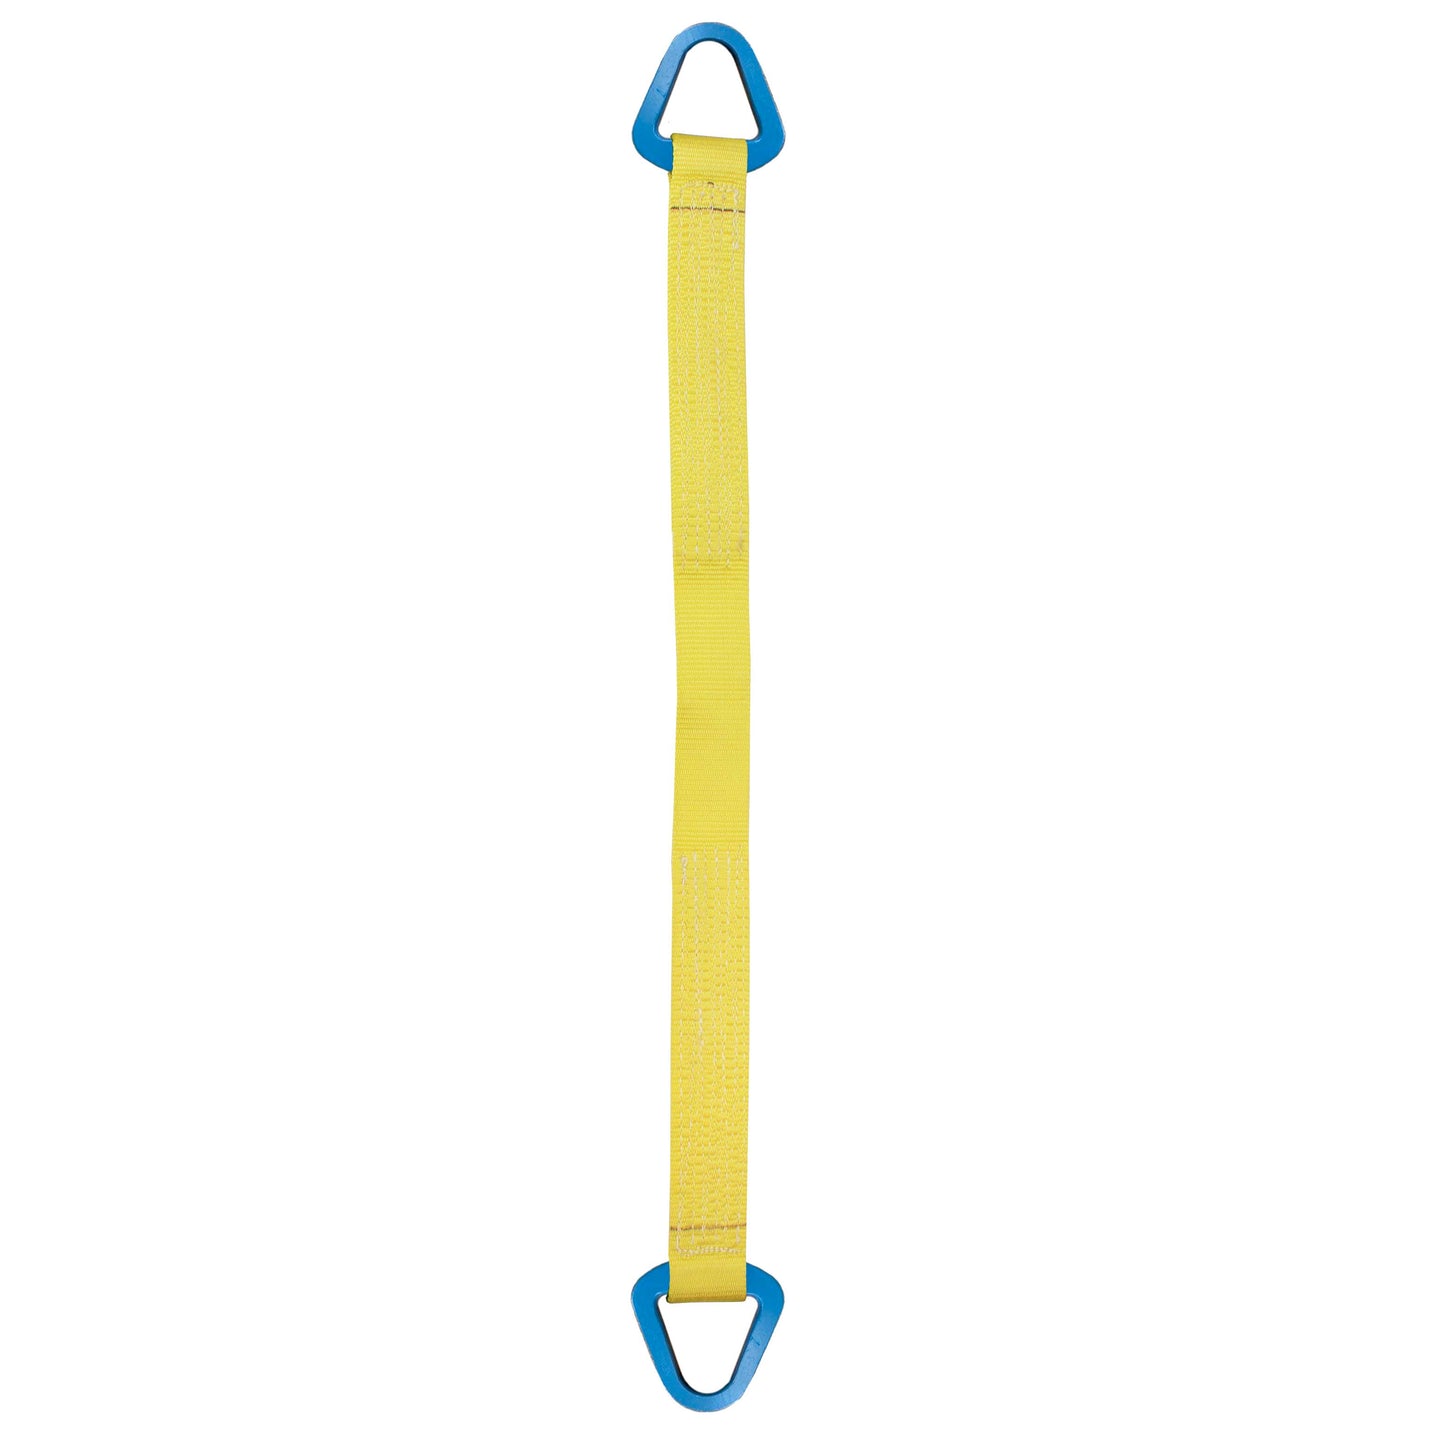 Nylon Lifting Sling Triangle 2 inch x 12 foot 2ply image 1 of 2